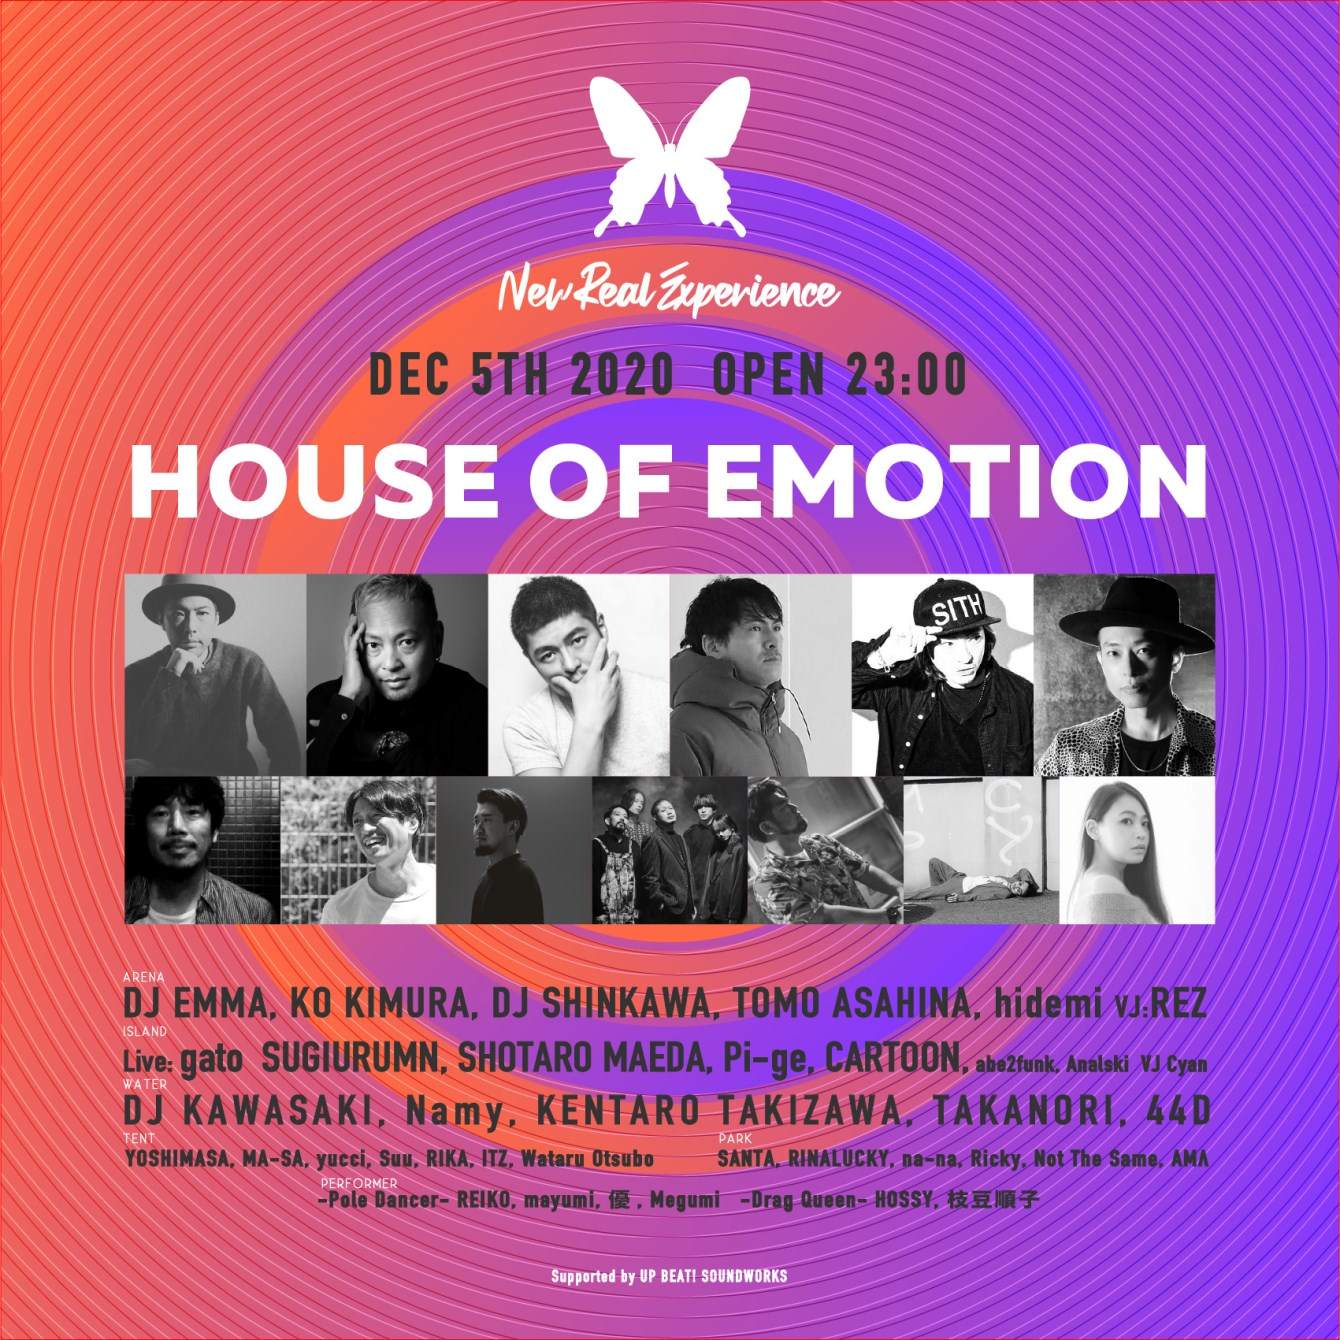 New Real Experience 'House OF Emotion' - Página trasera